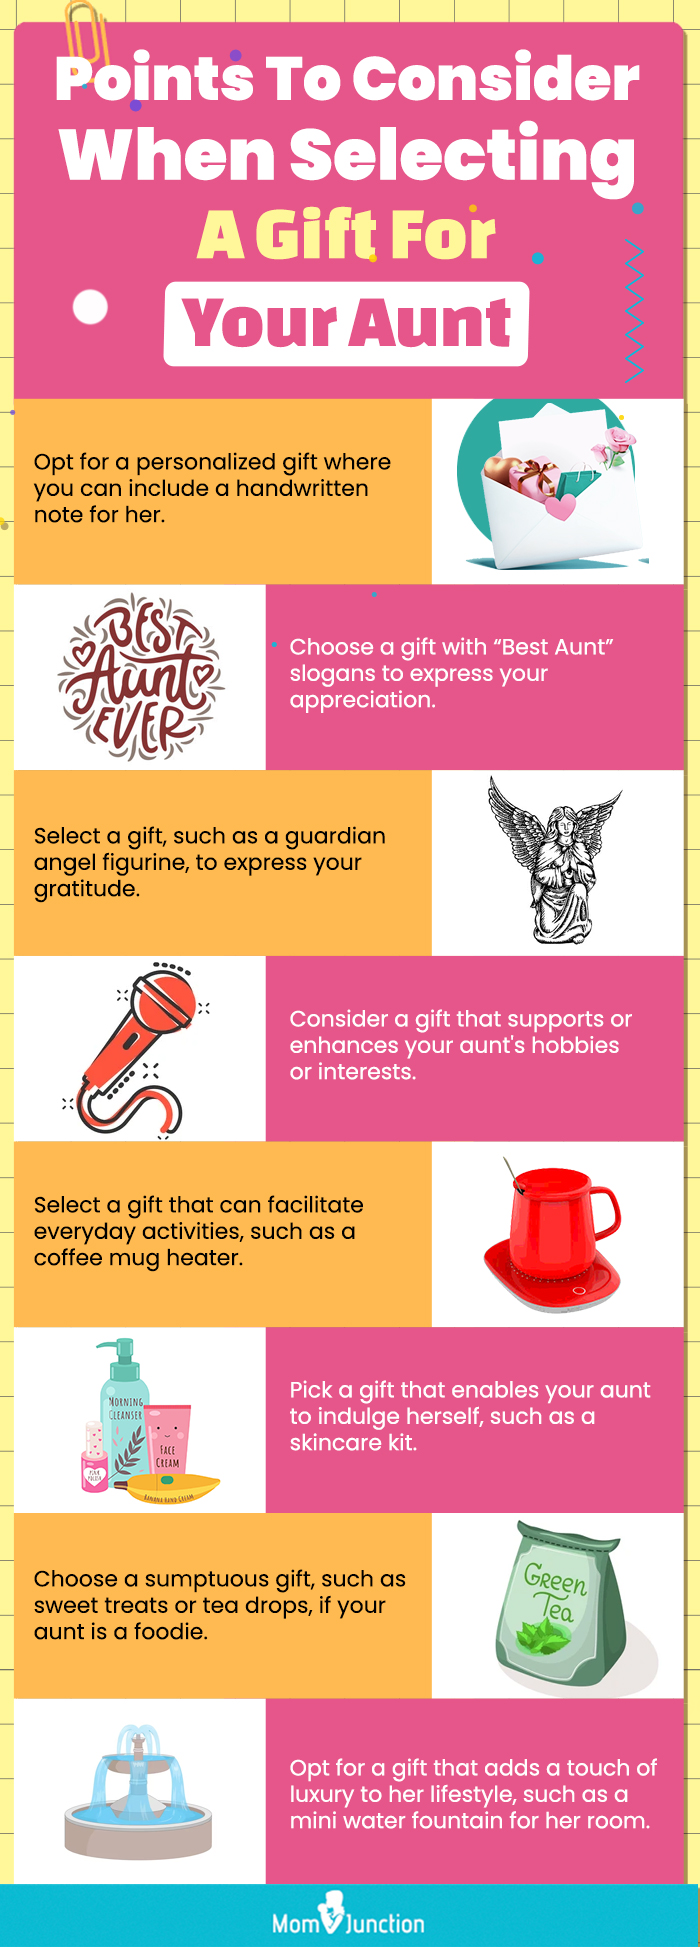 Points To Consider When Selecting The Right Gift For Your Aunt (infographic)